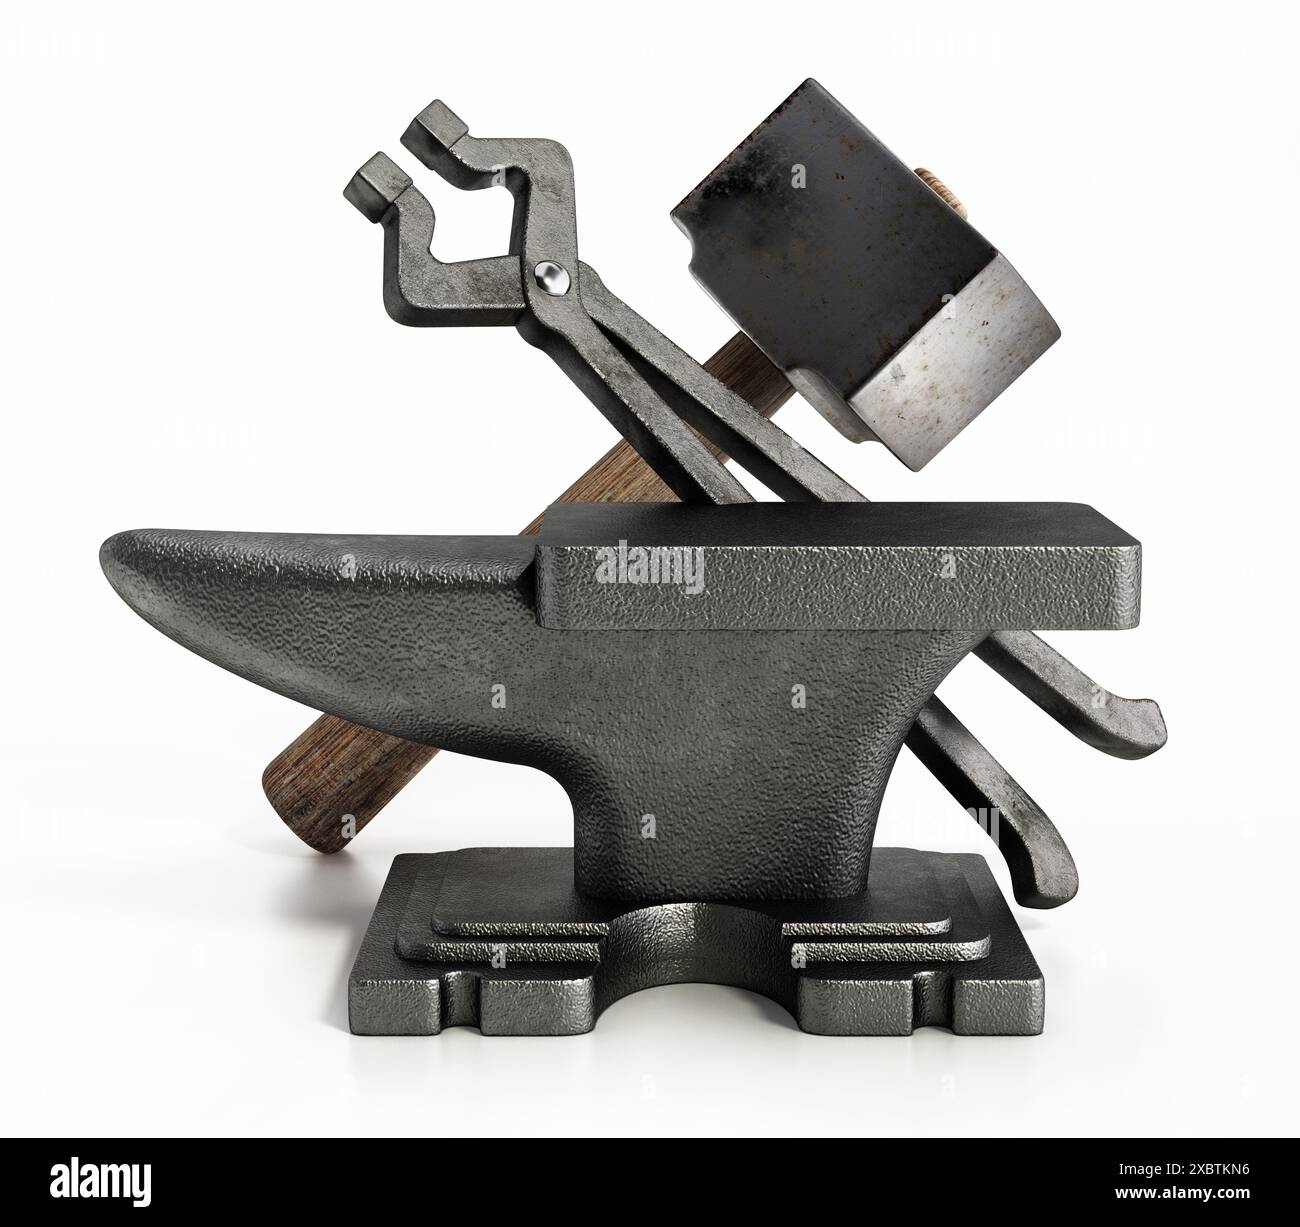 Anvil, hammer and blacksmith tong isolated on white background. 3D illustration. Stock Photo